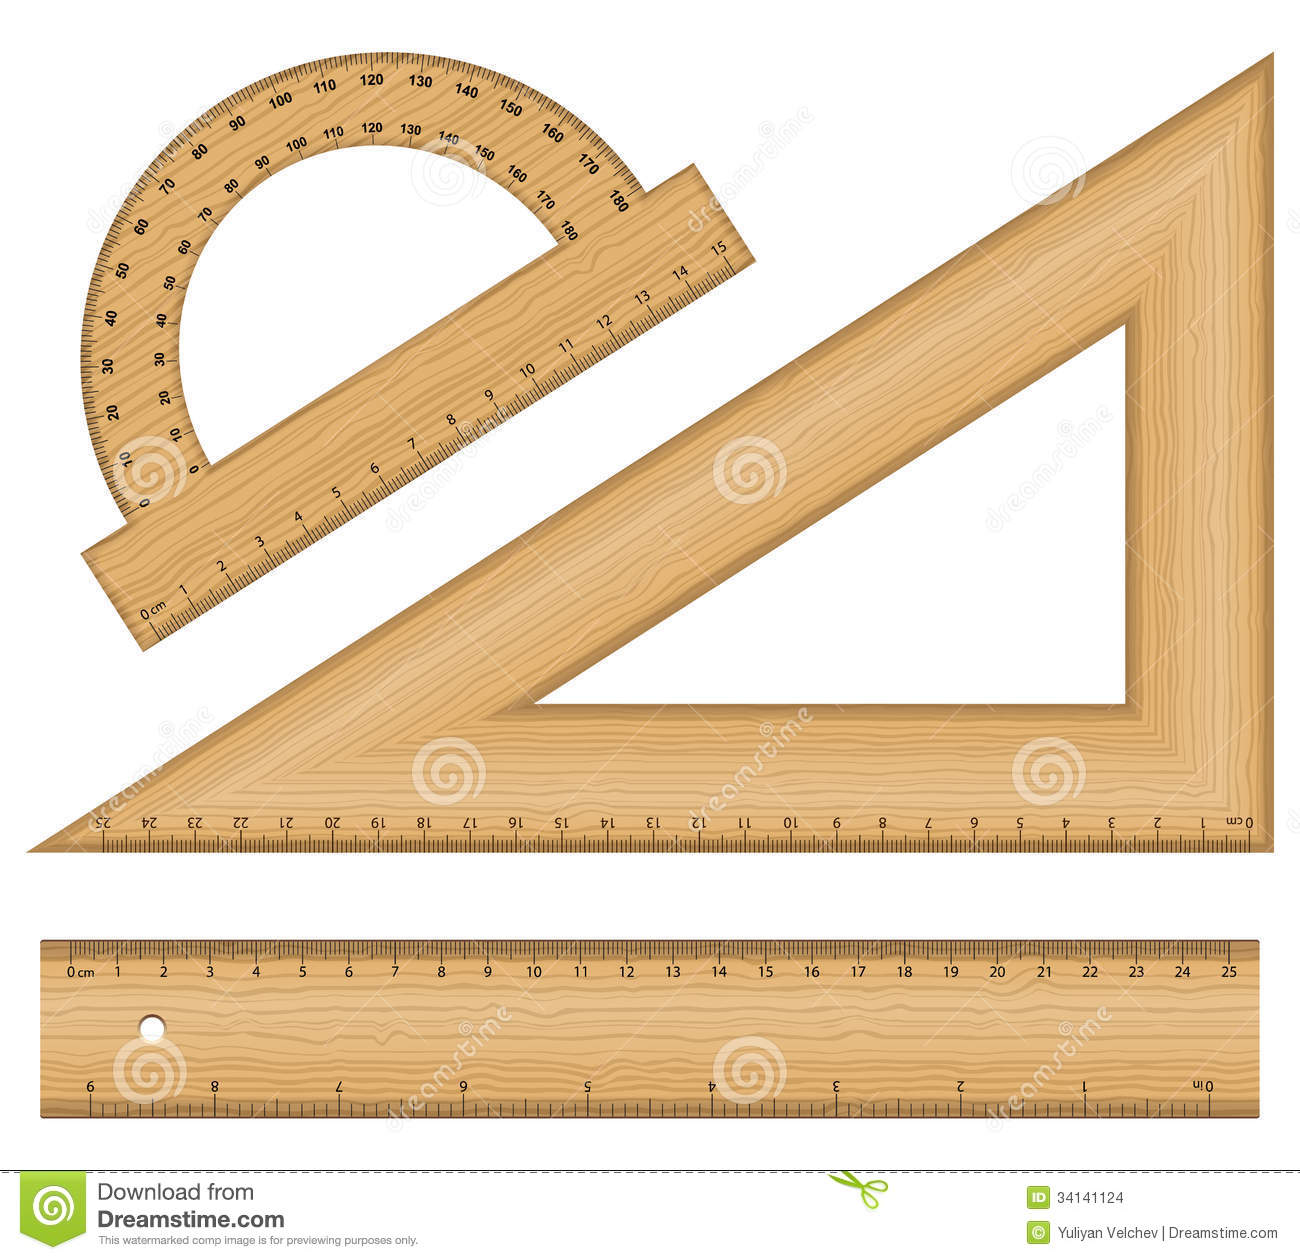 Clipart Displaying 19 Images For Triangle Protractor Clipart Toolbar